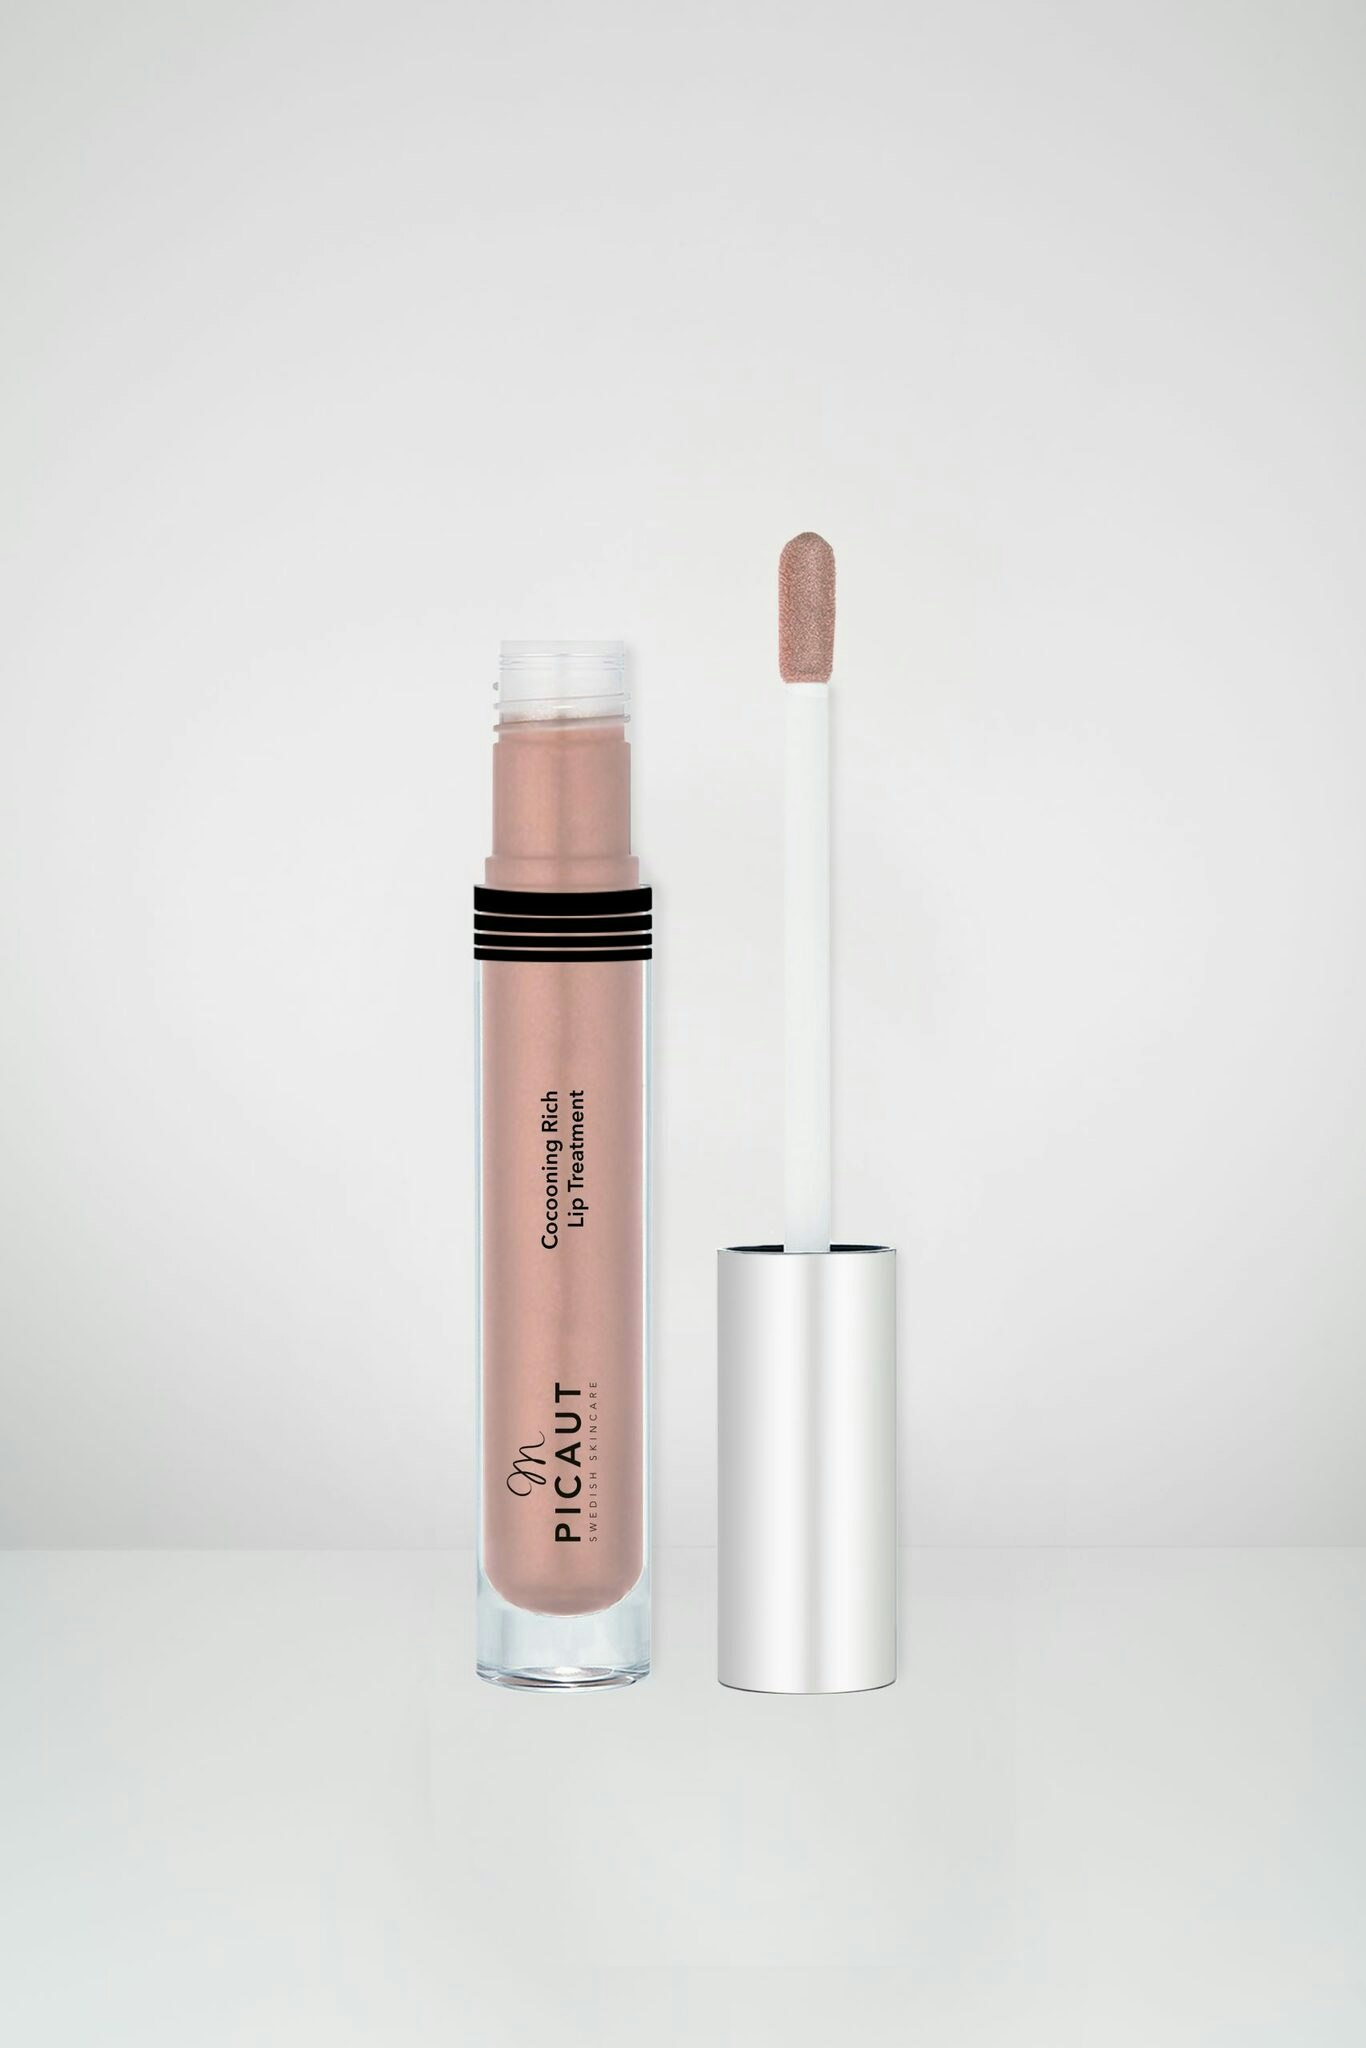 Cocooning Rich Lip Treatment – Nude